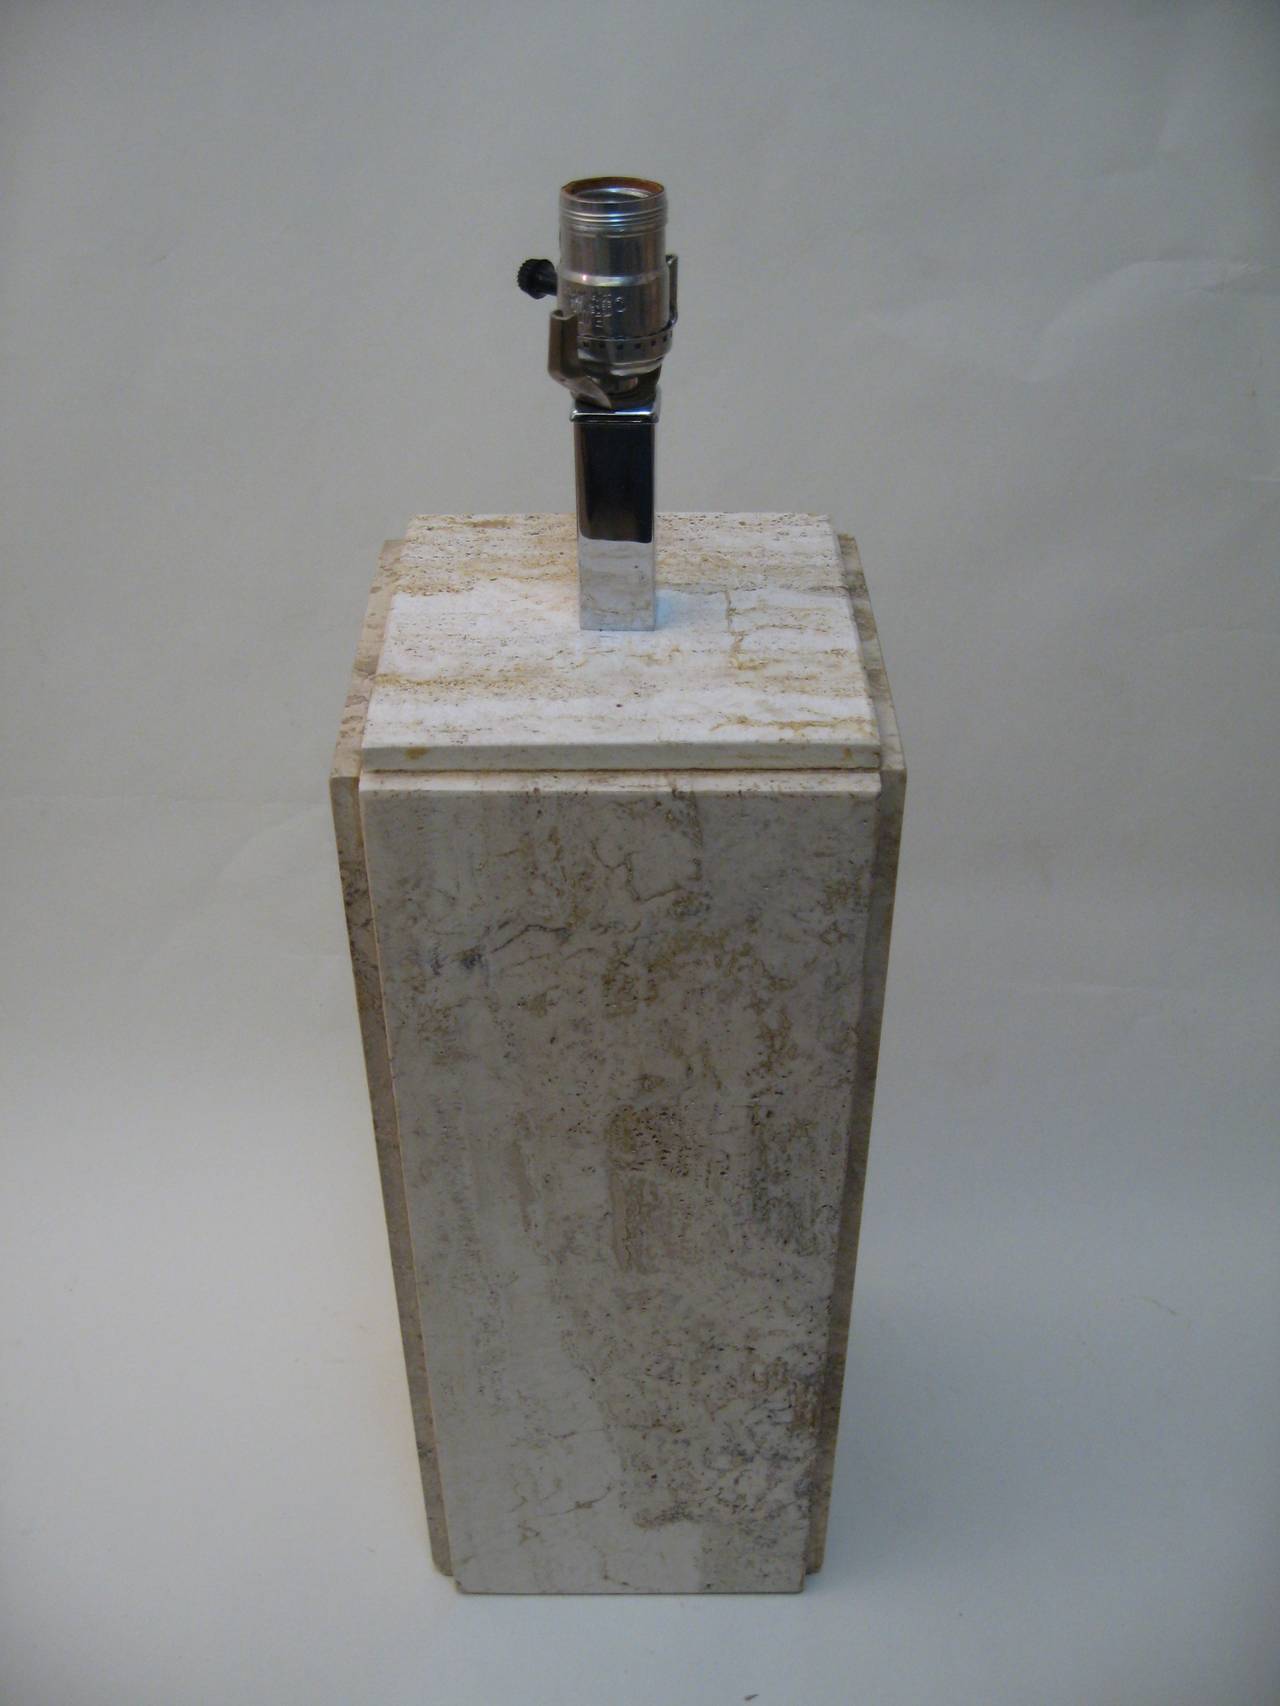 Architectural Travertine lamps for Raymor.  Travertine slab construction.  Very good, original working condition.  Signed with blue label on socket. 23.5